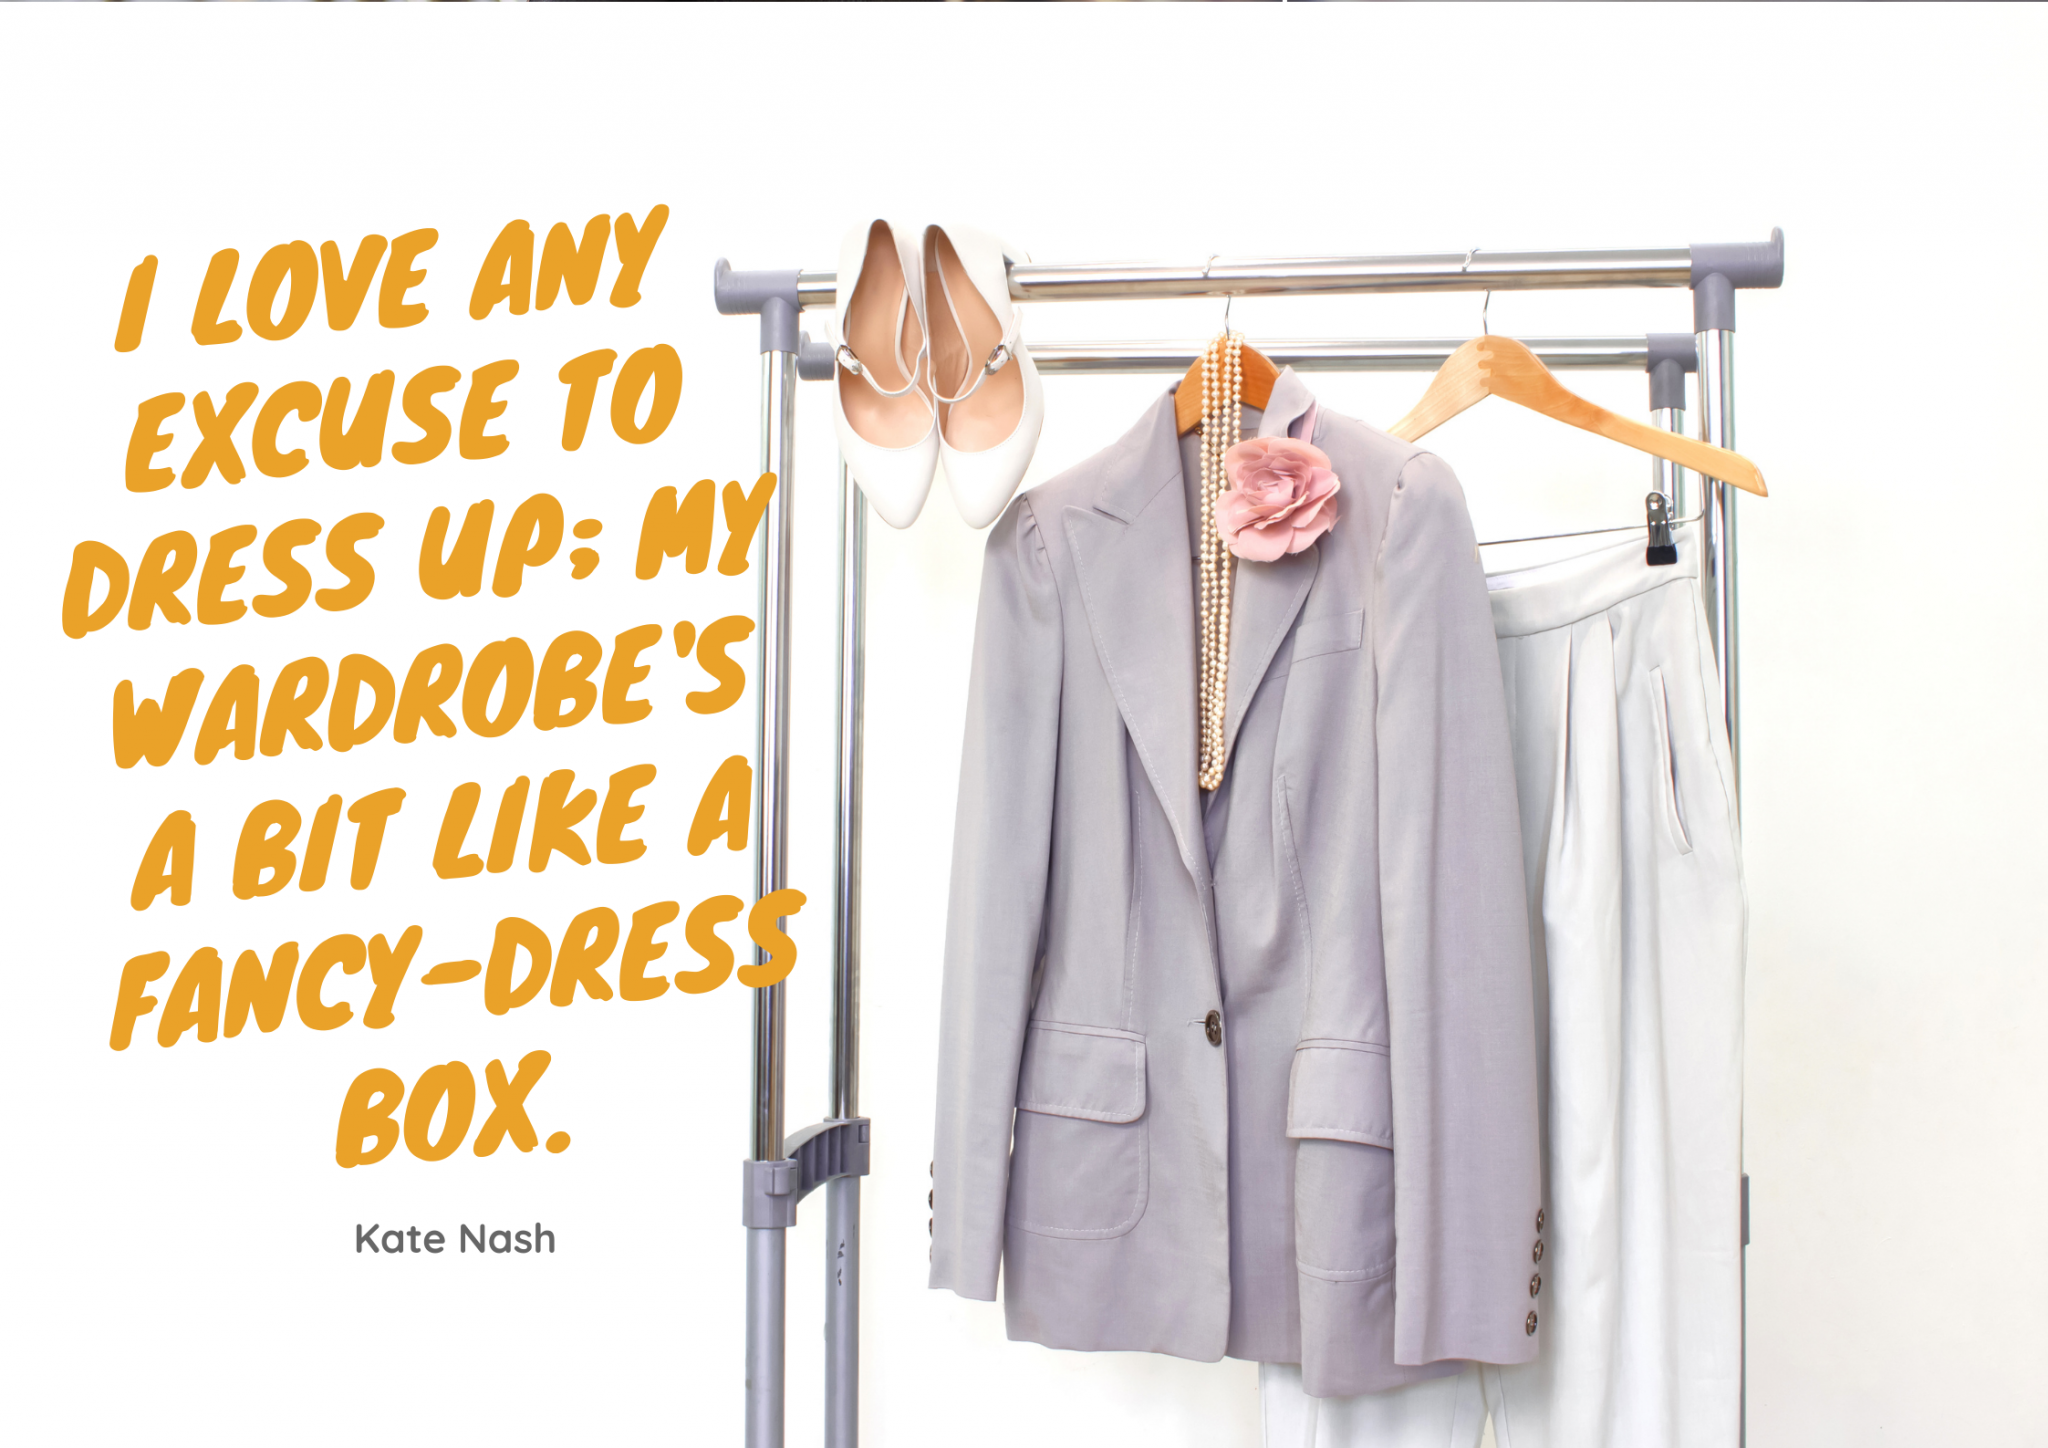 A classy outfit hands on a clothing rack -- white high heels, a gray blazer accessorized with a pink lapel flower and long strand of pearls, and white pants, all on hangers. Orange text on the image says, "I love any excuse to dress up; my wardrobe's a bit like a fancy-dress box. - Kate Nash"
I love any excuse to dress up; my wardrobe's a bit like a fancy-dress box. - Kate Nash